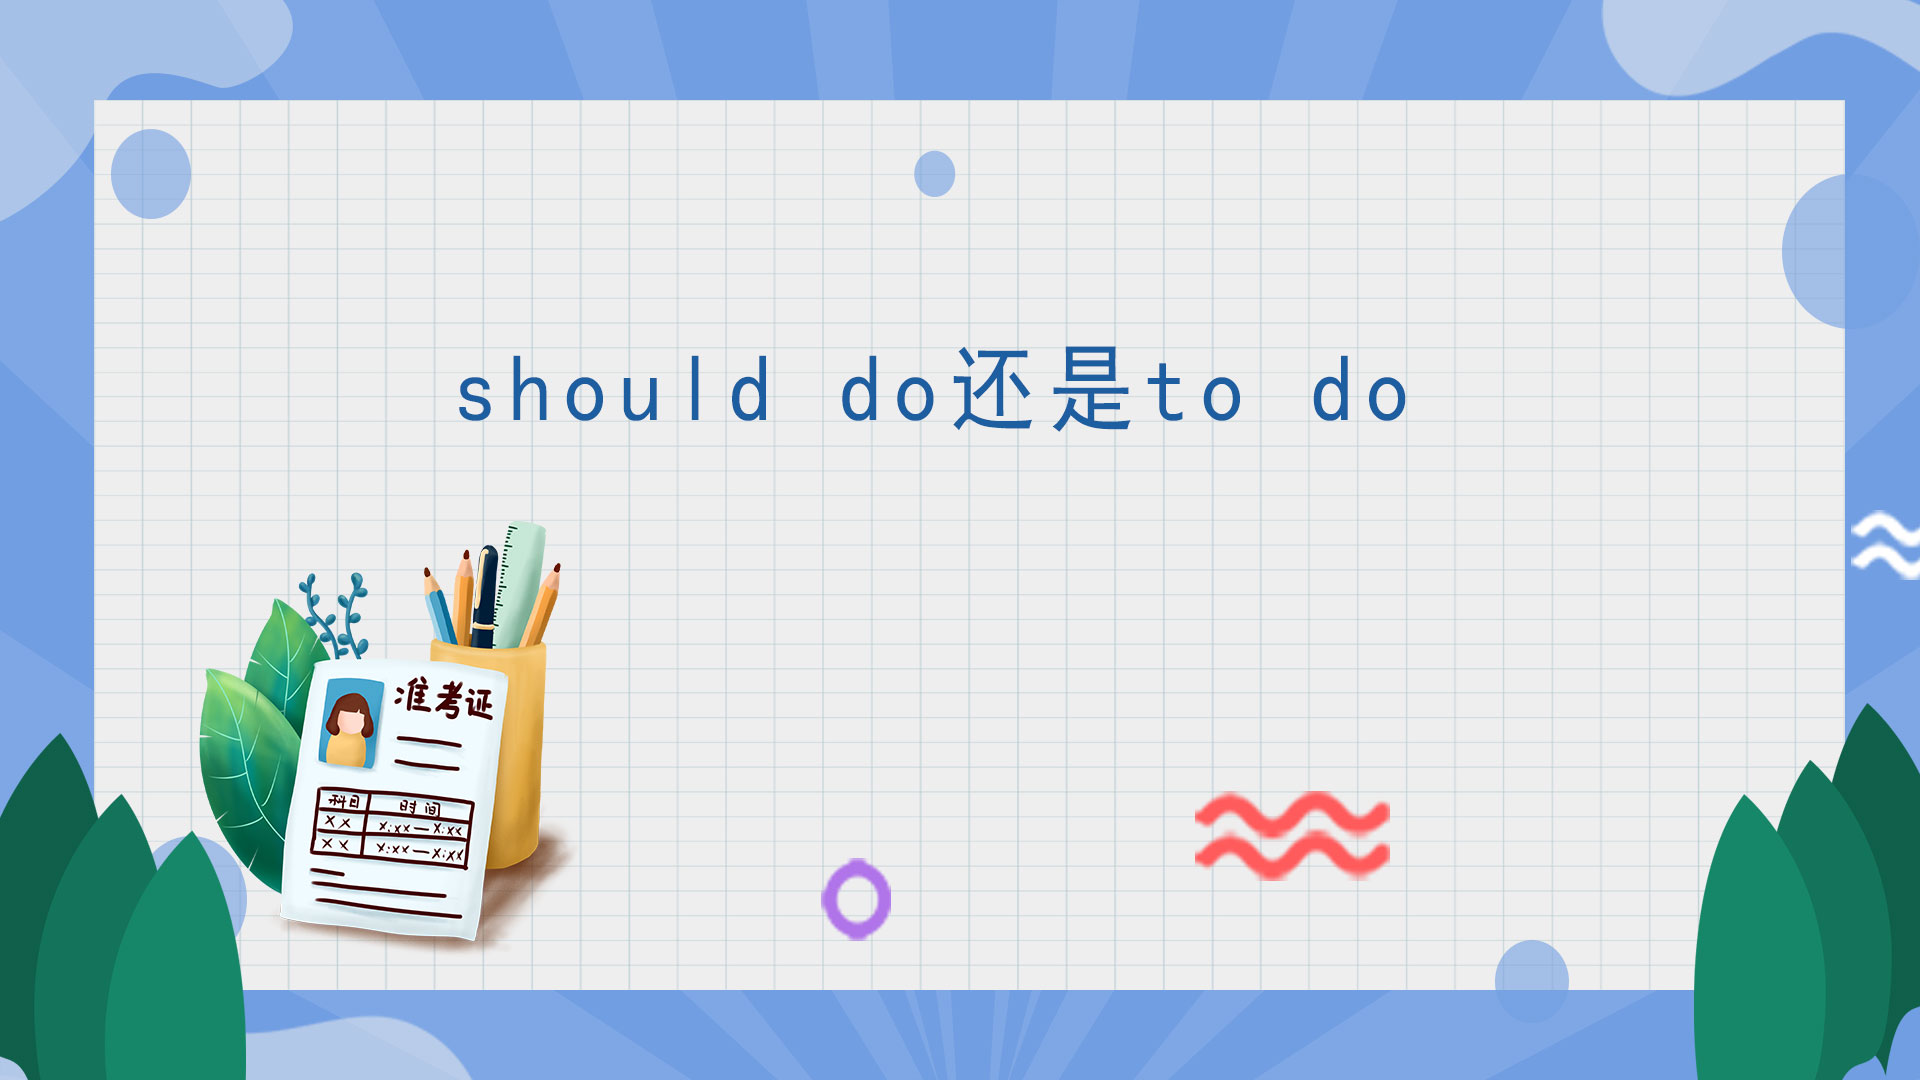 should do还是to do